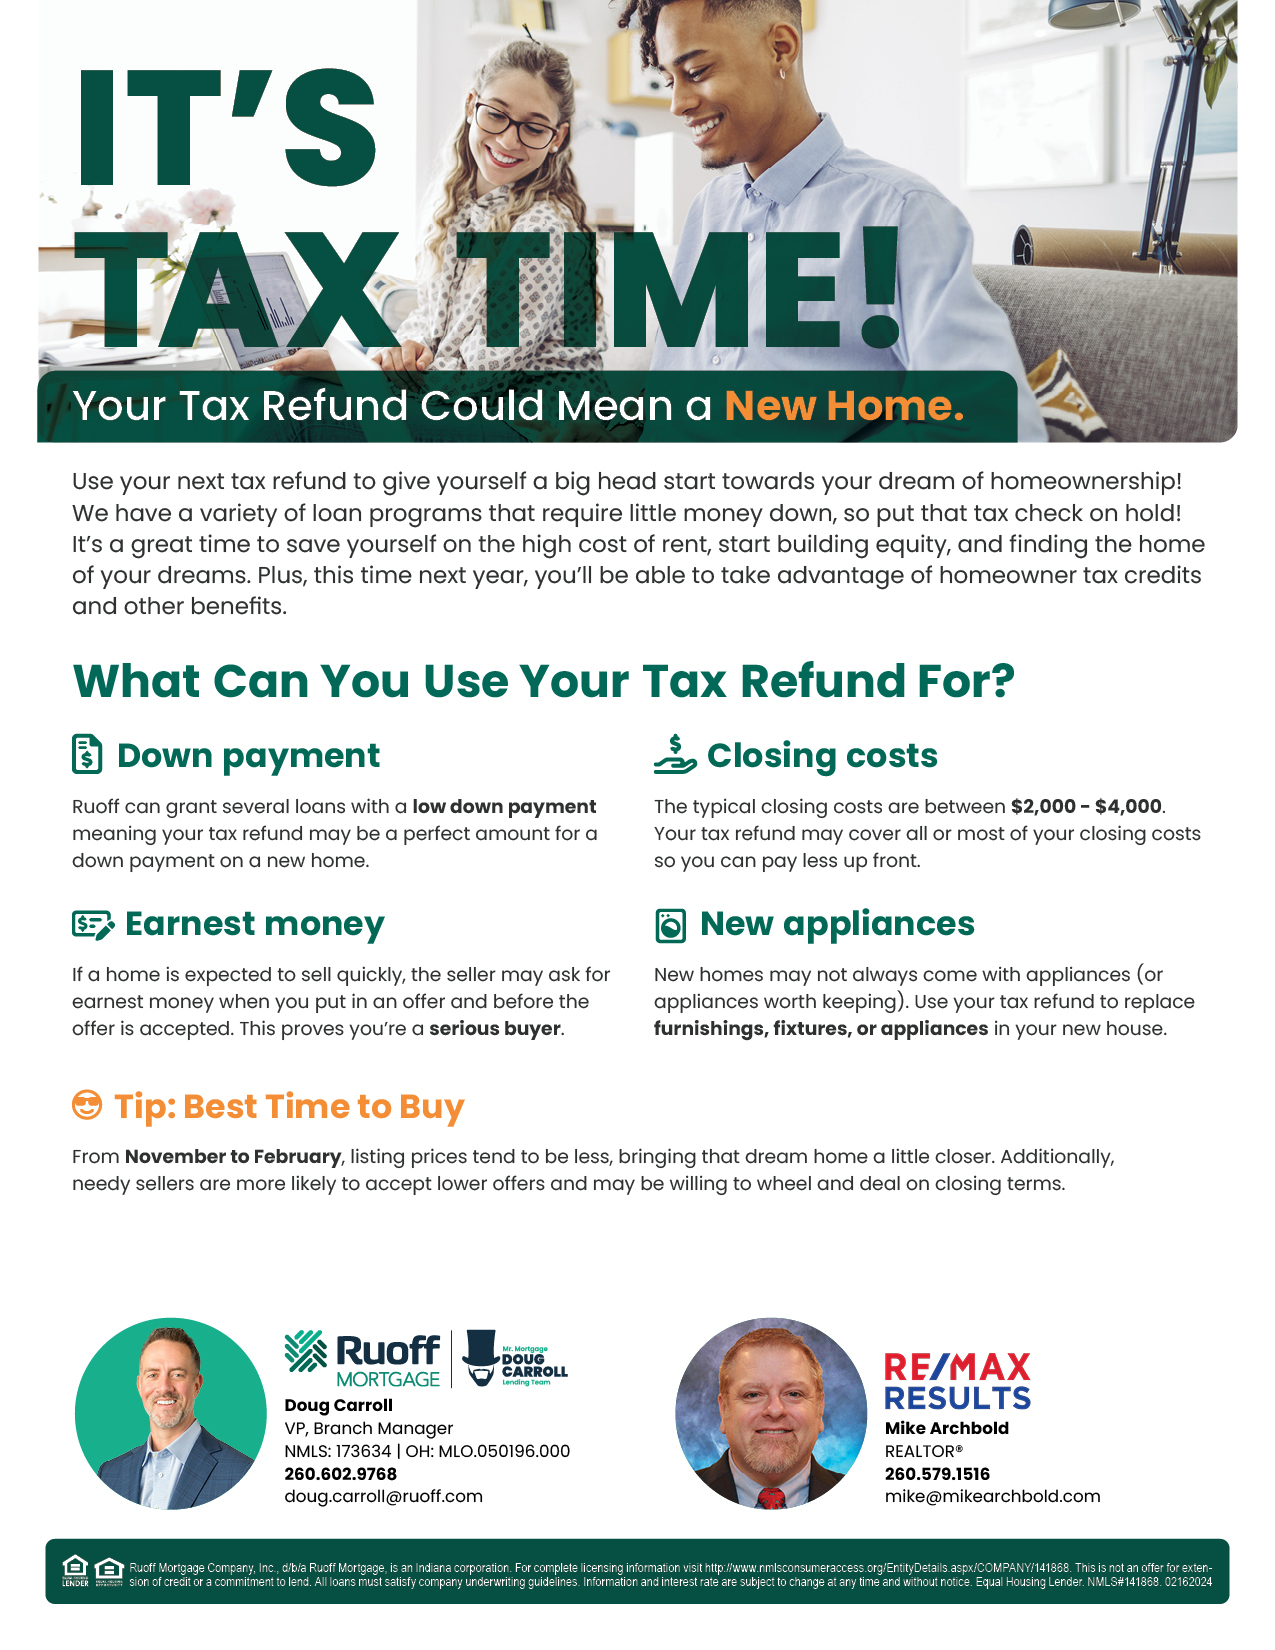 Your Tax Refund Could Mean a New Home | RE/MAX Results | Hoosier Home Listings | Michael Archbold